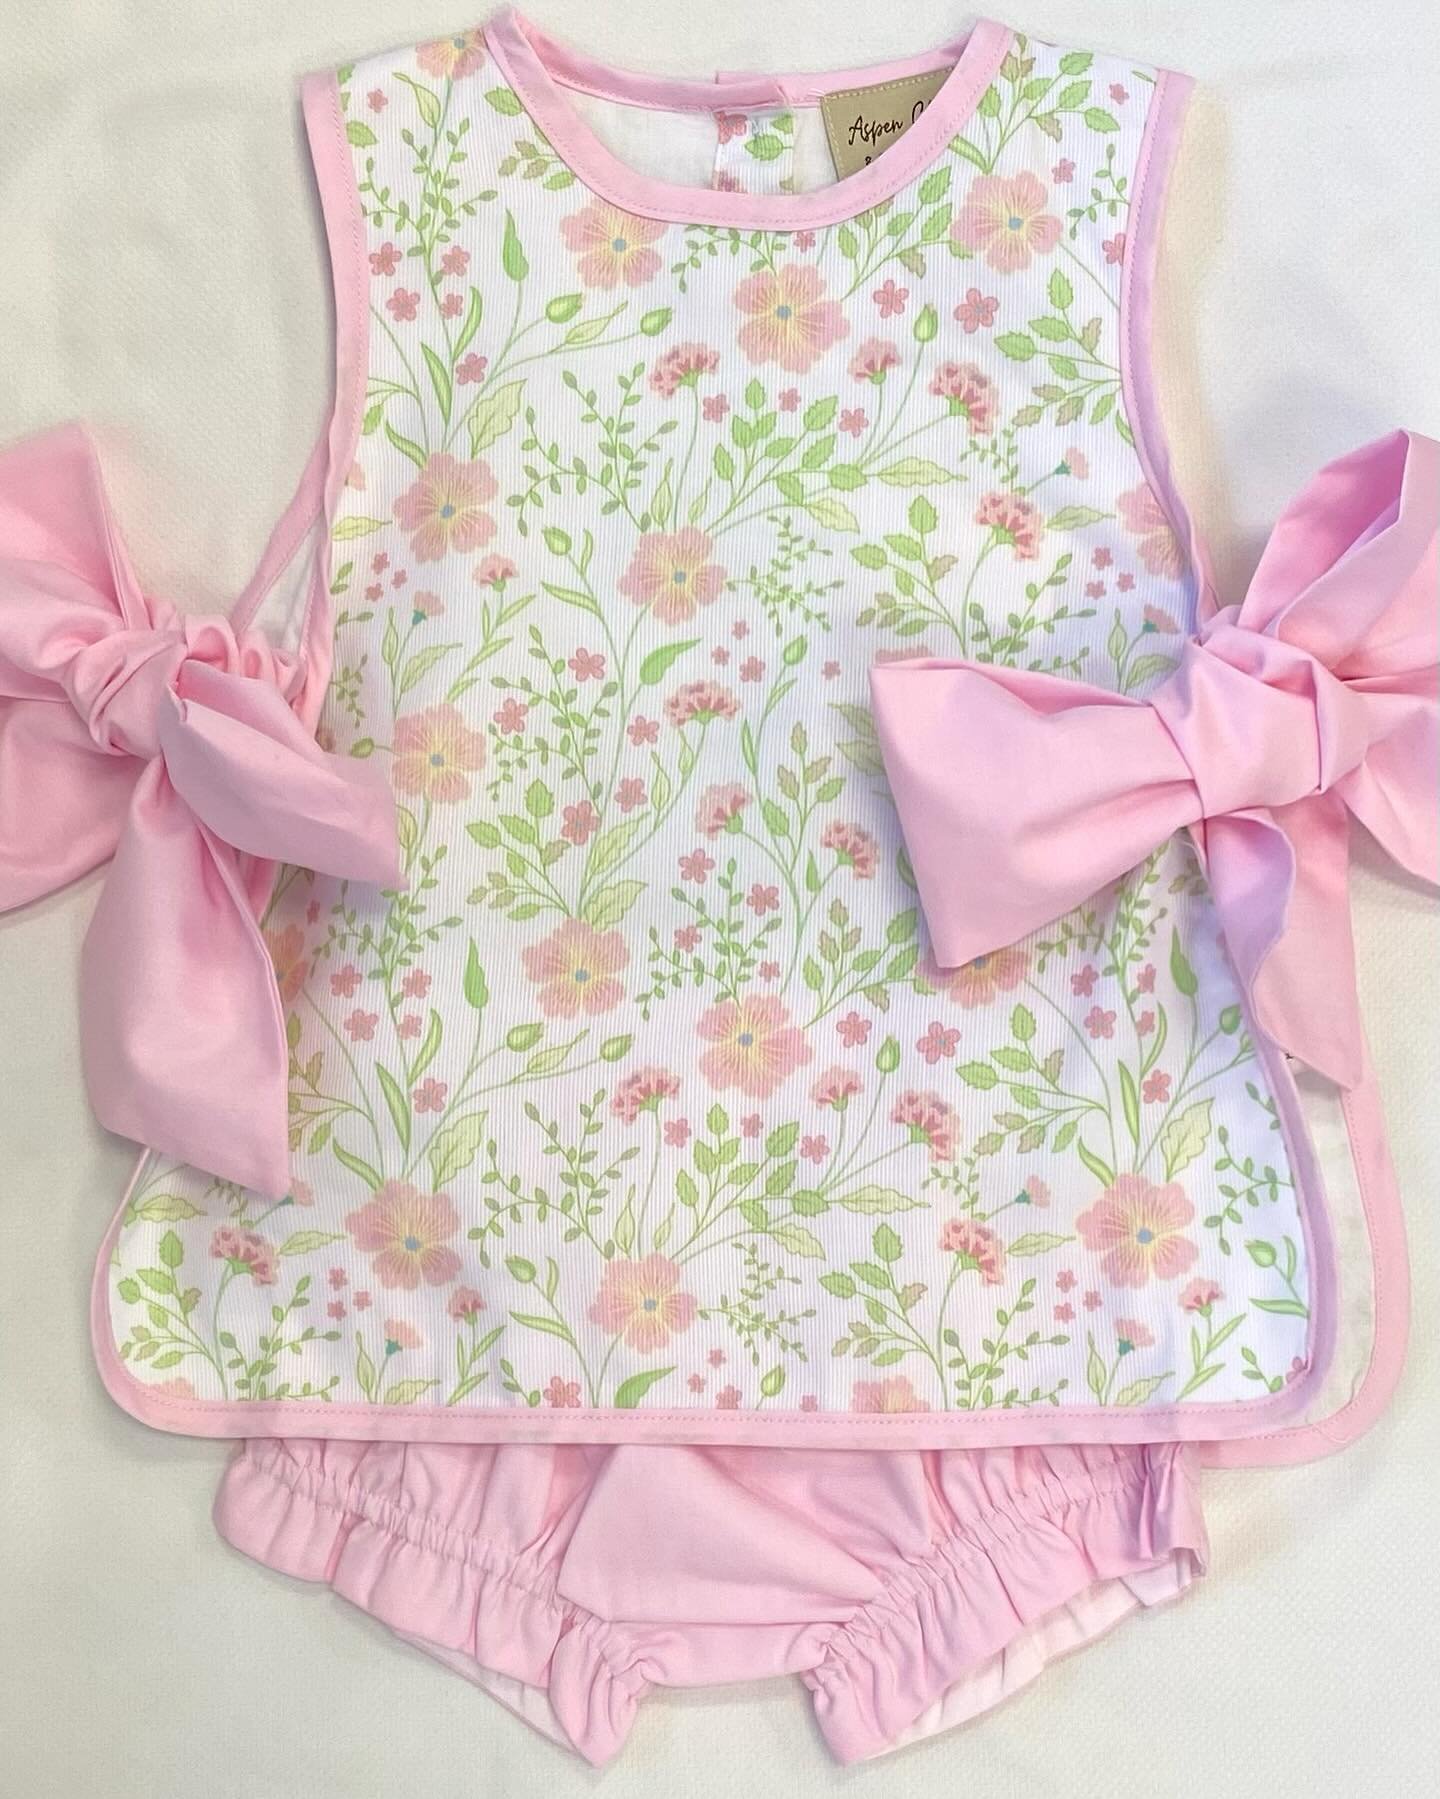 The sweetest diaper set with the sweetest details 🎀

.
.
#childrensshop #childrensshopatl #diapersets #aspenclaire #shoplocal